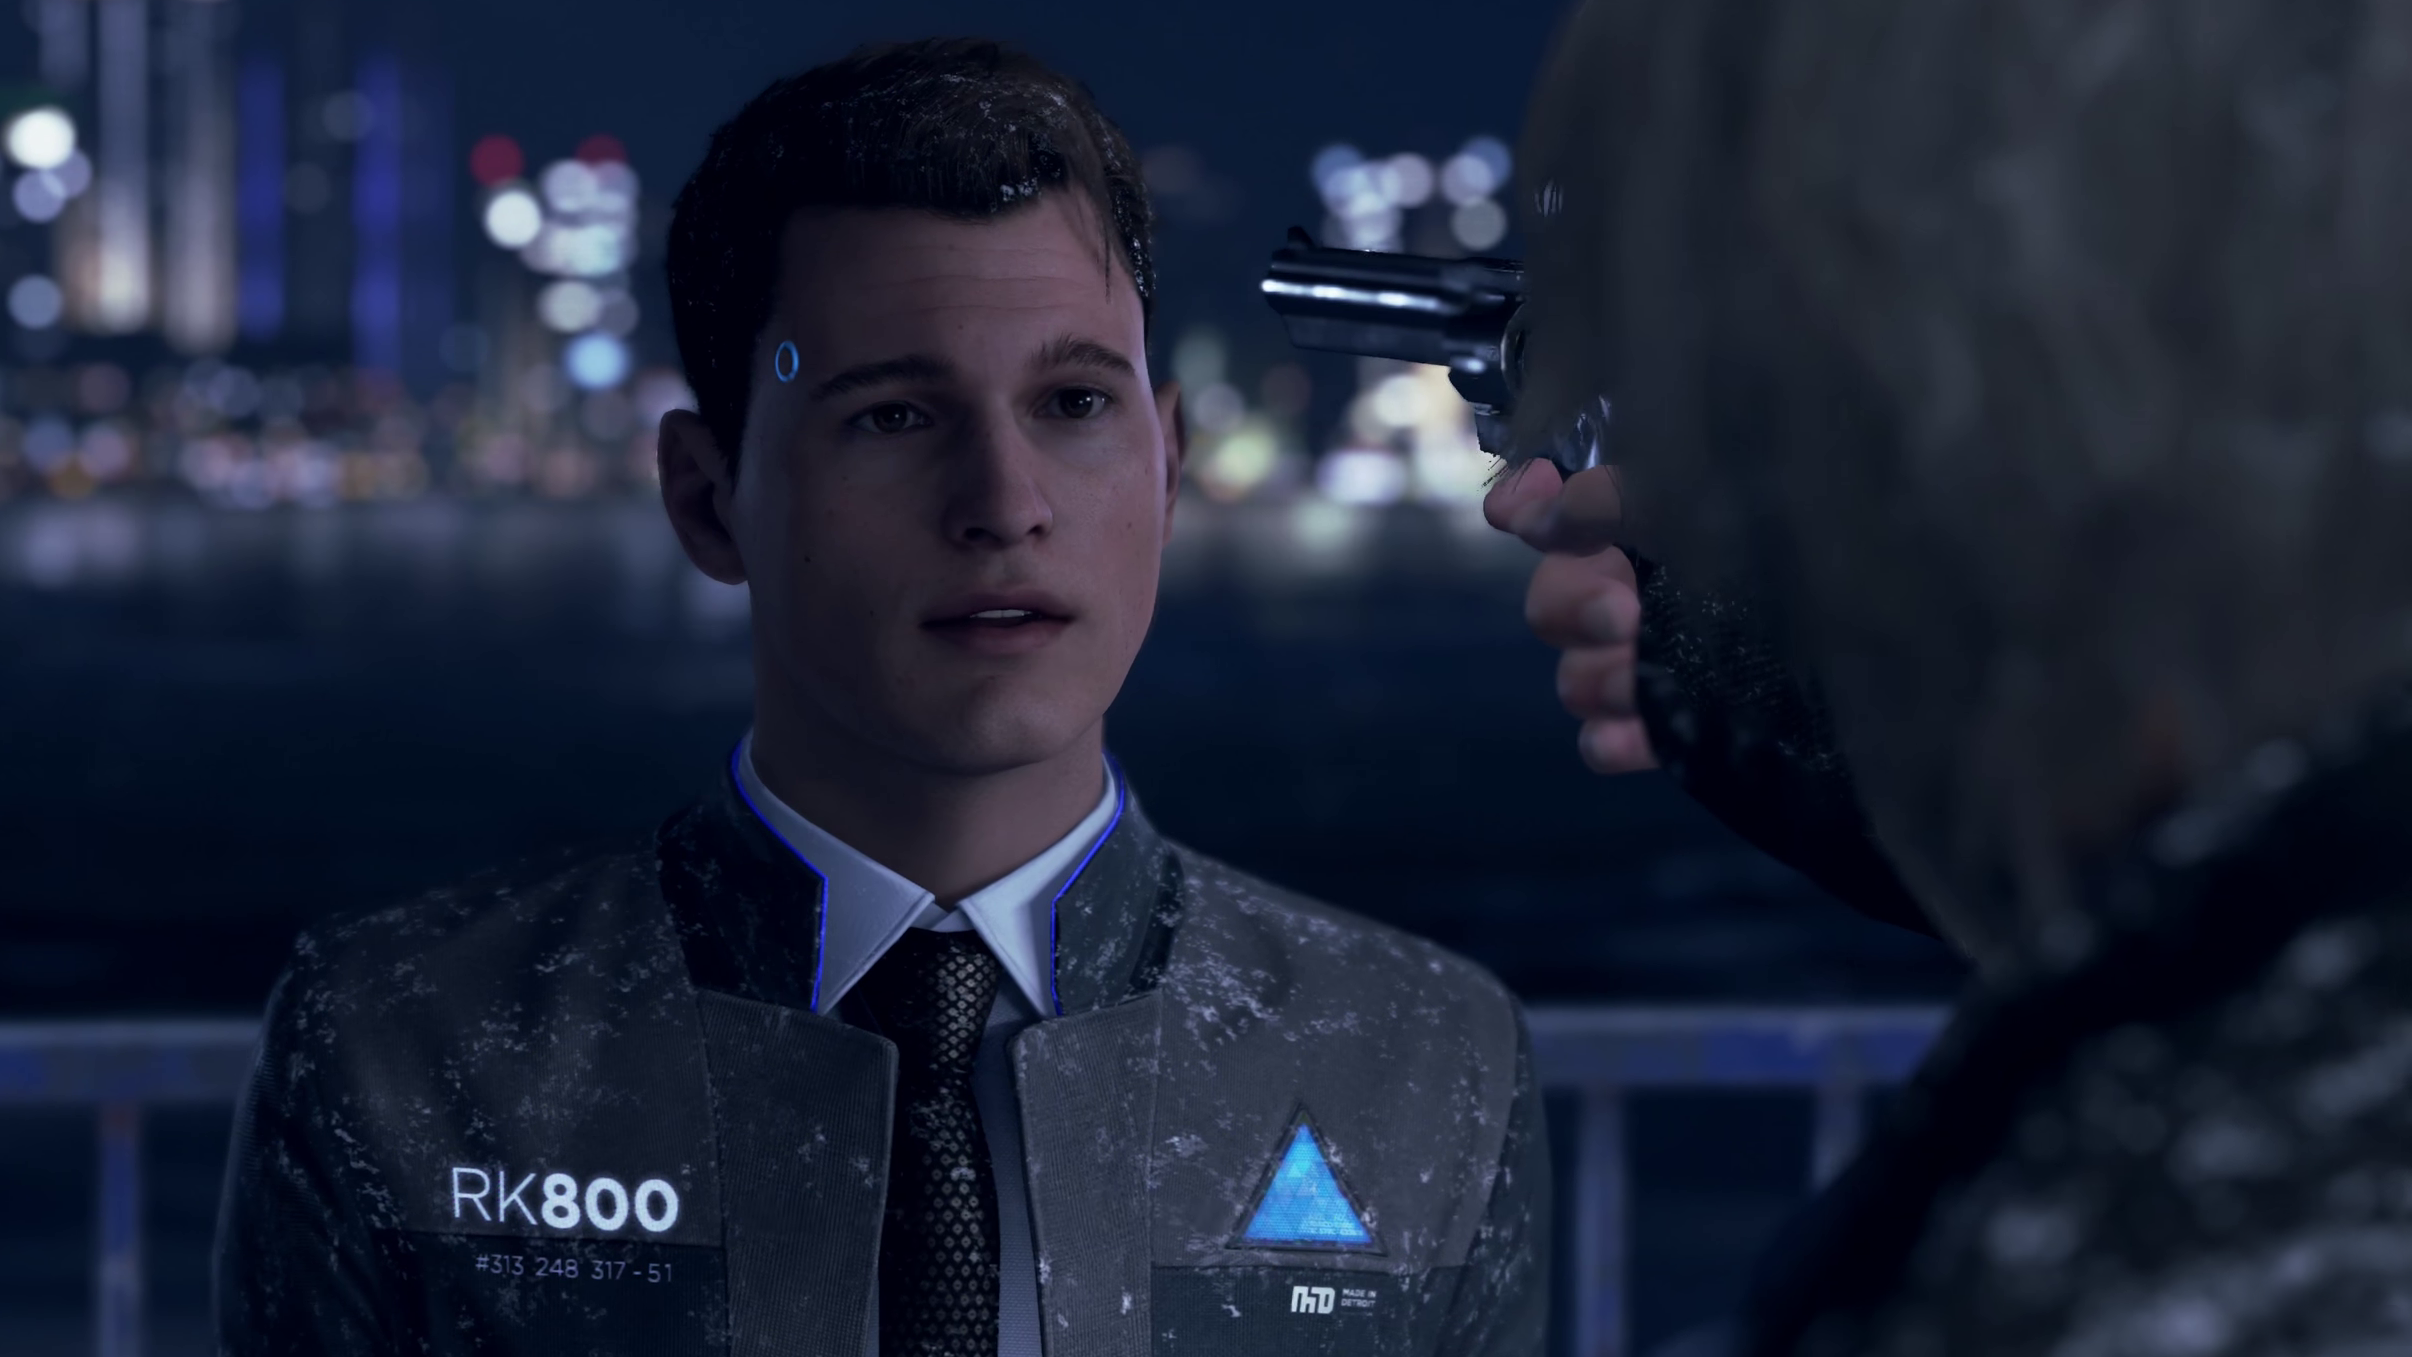 Detroit Bee Human Image Hank Threatens To Shoot Connor HD